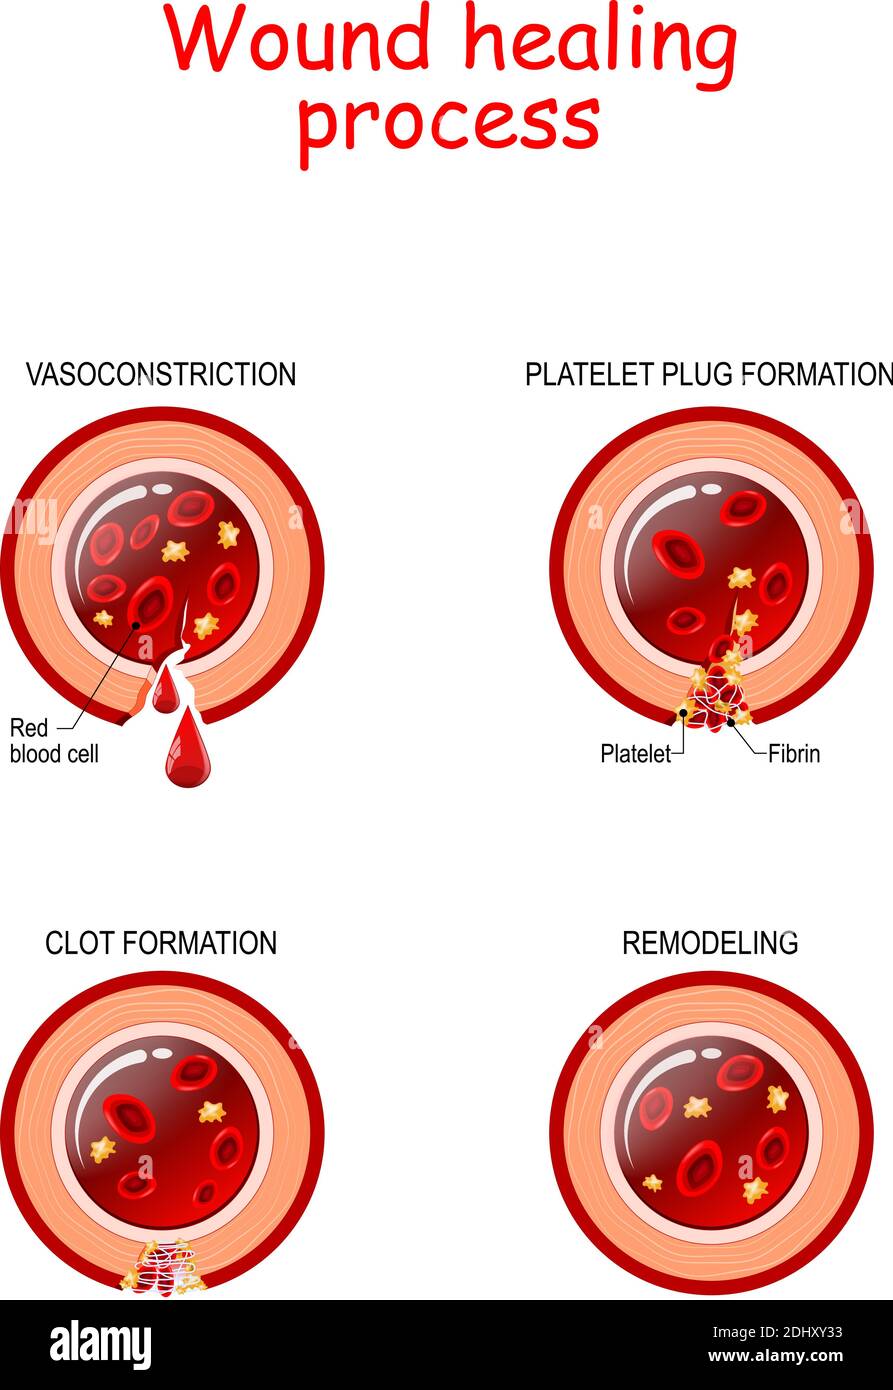 Phases of the wound healing process. Hemostasis, Inflammatory, Proliferative, Maturation and remodeling phase. Cross section of blood vessel. poster Stock Vector